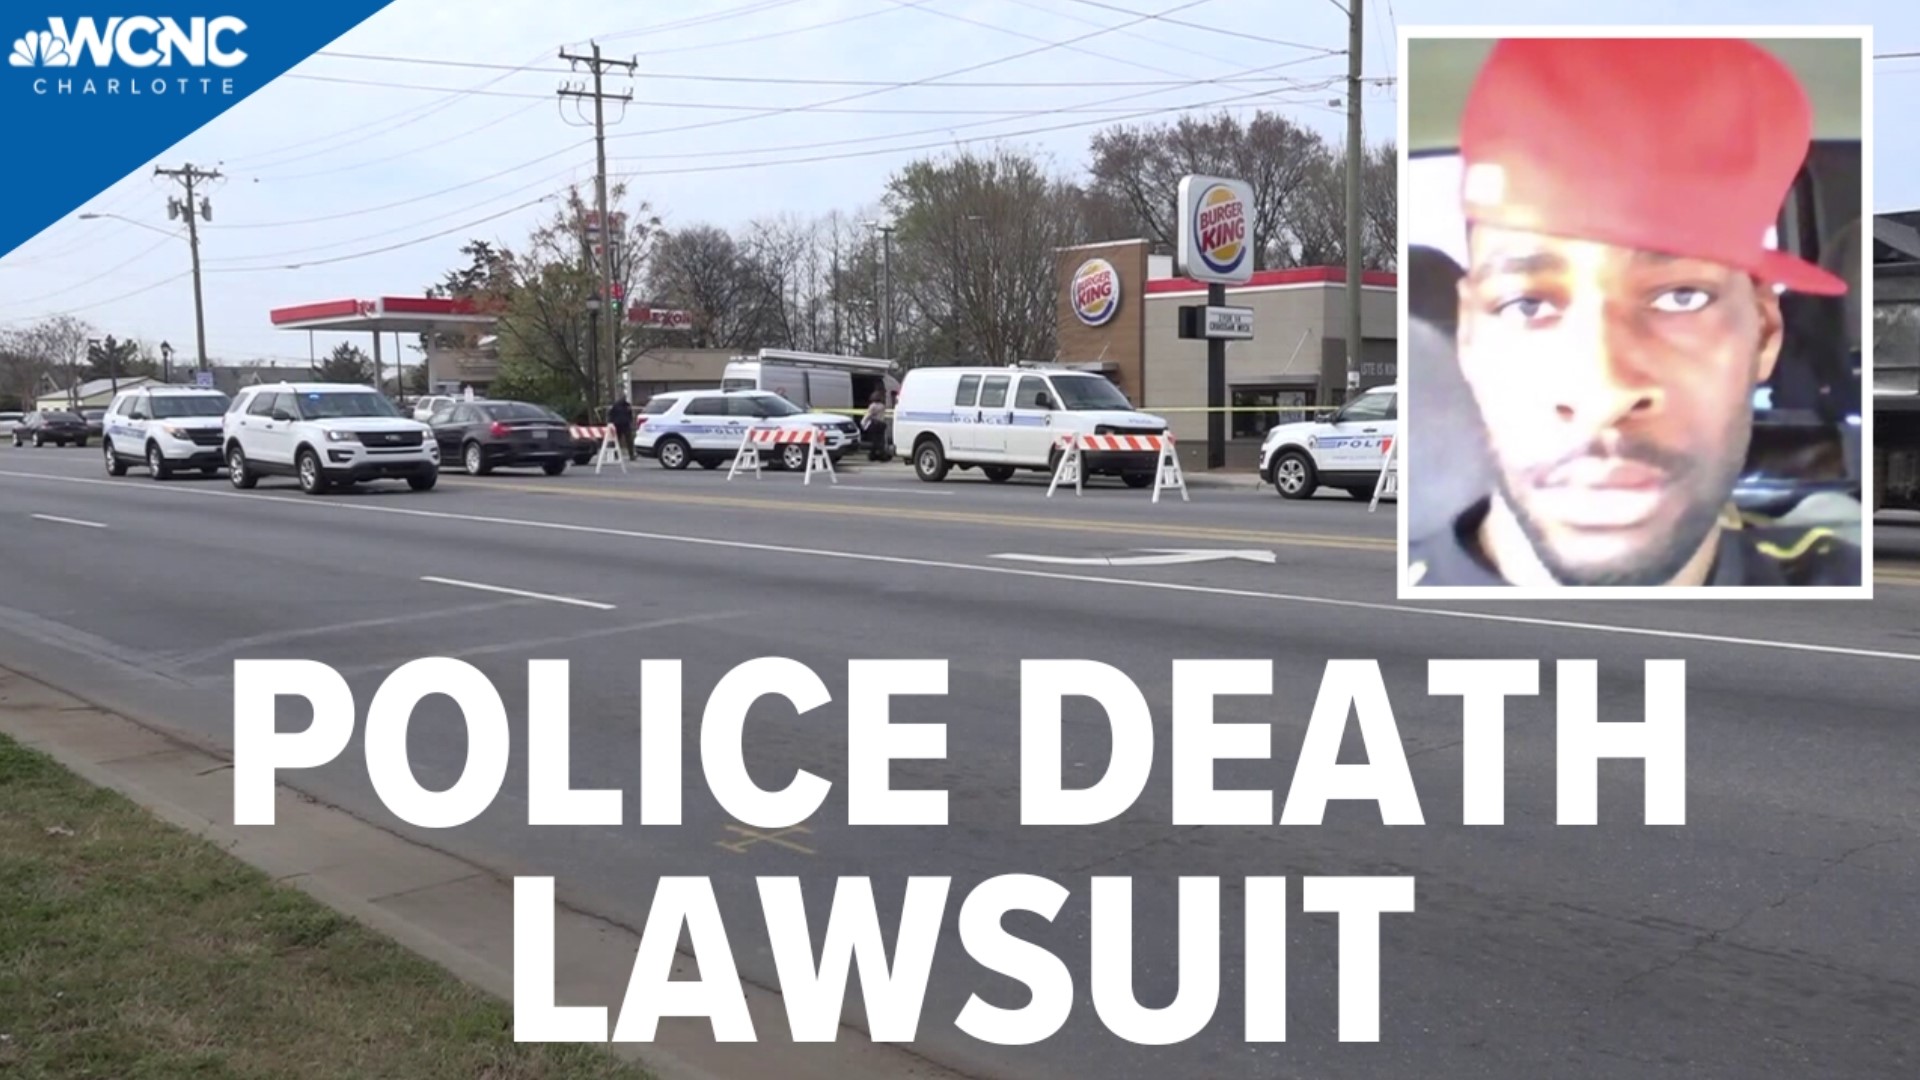 The Fourth Circuit Court of Appeals ruled on Tuesday in the appeal surrounding the fatal shooting of Danquirs Franklin back in 2019.